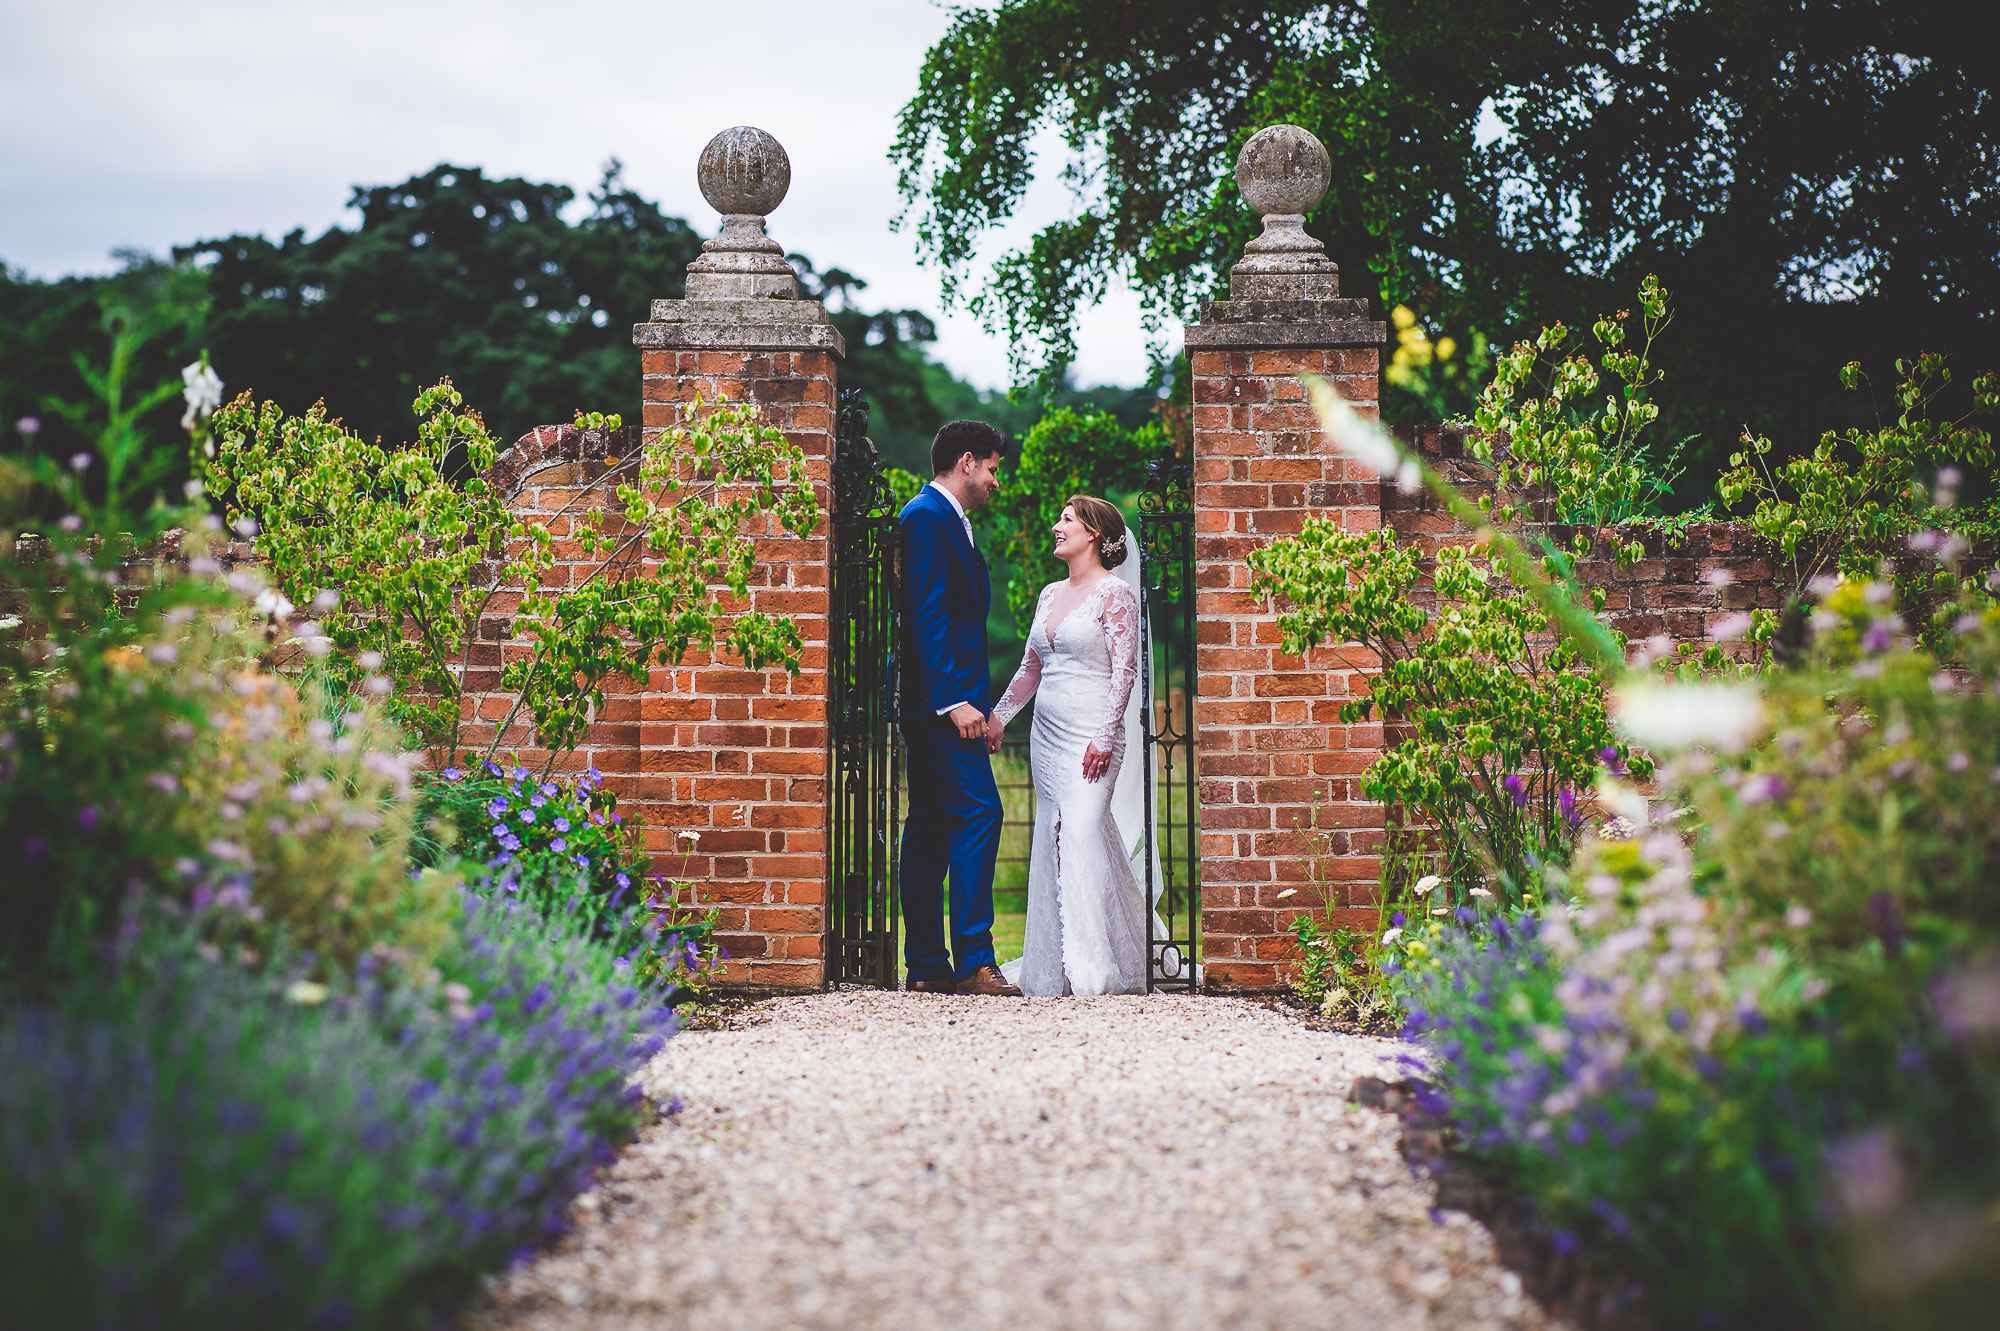 A wedding couple posing in front of a garden gate, beautifully captured by their wedding photographer.